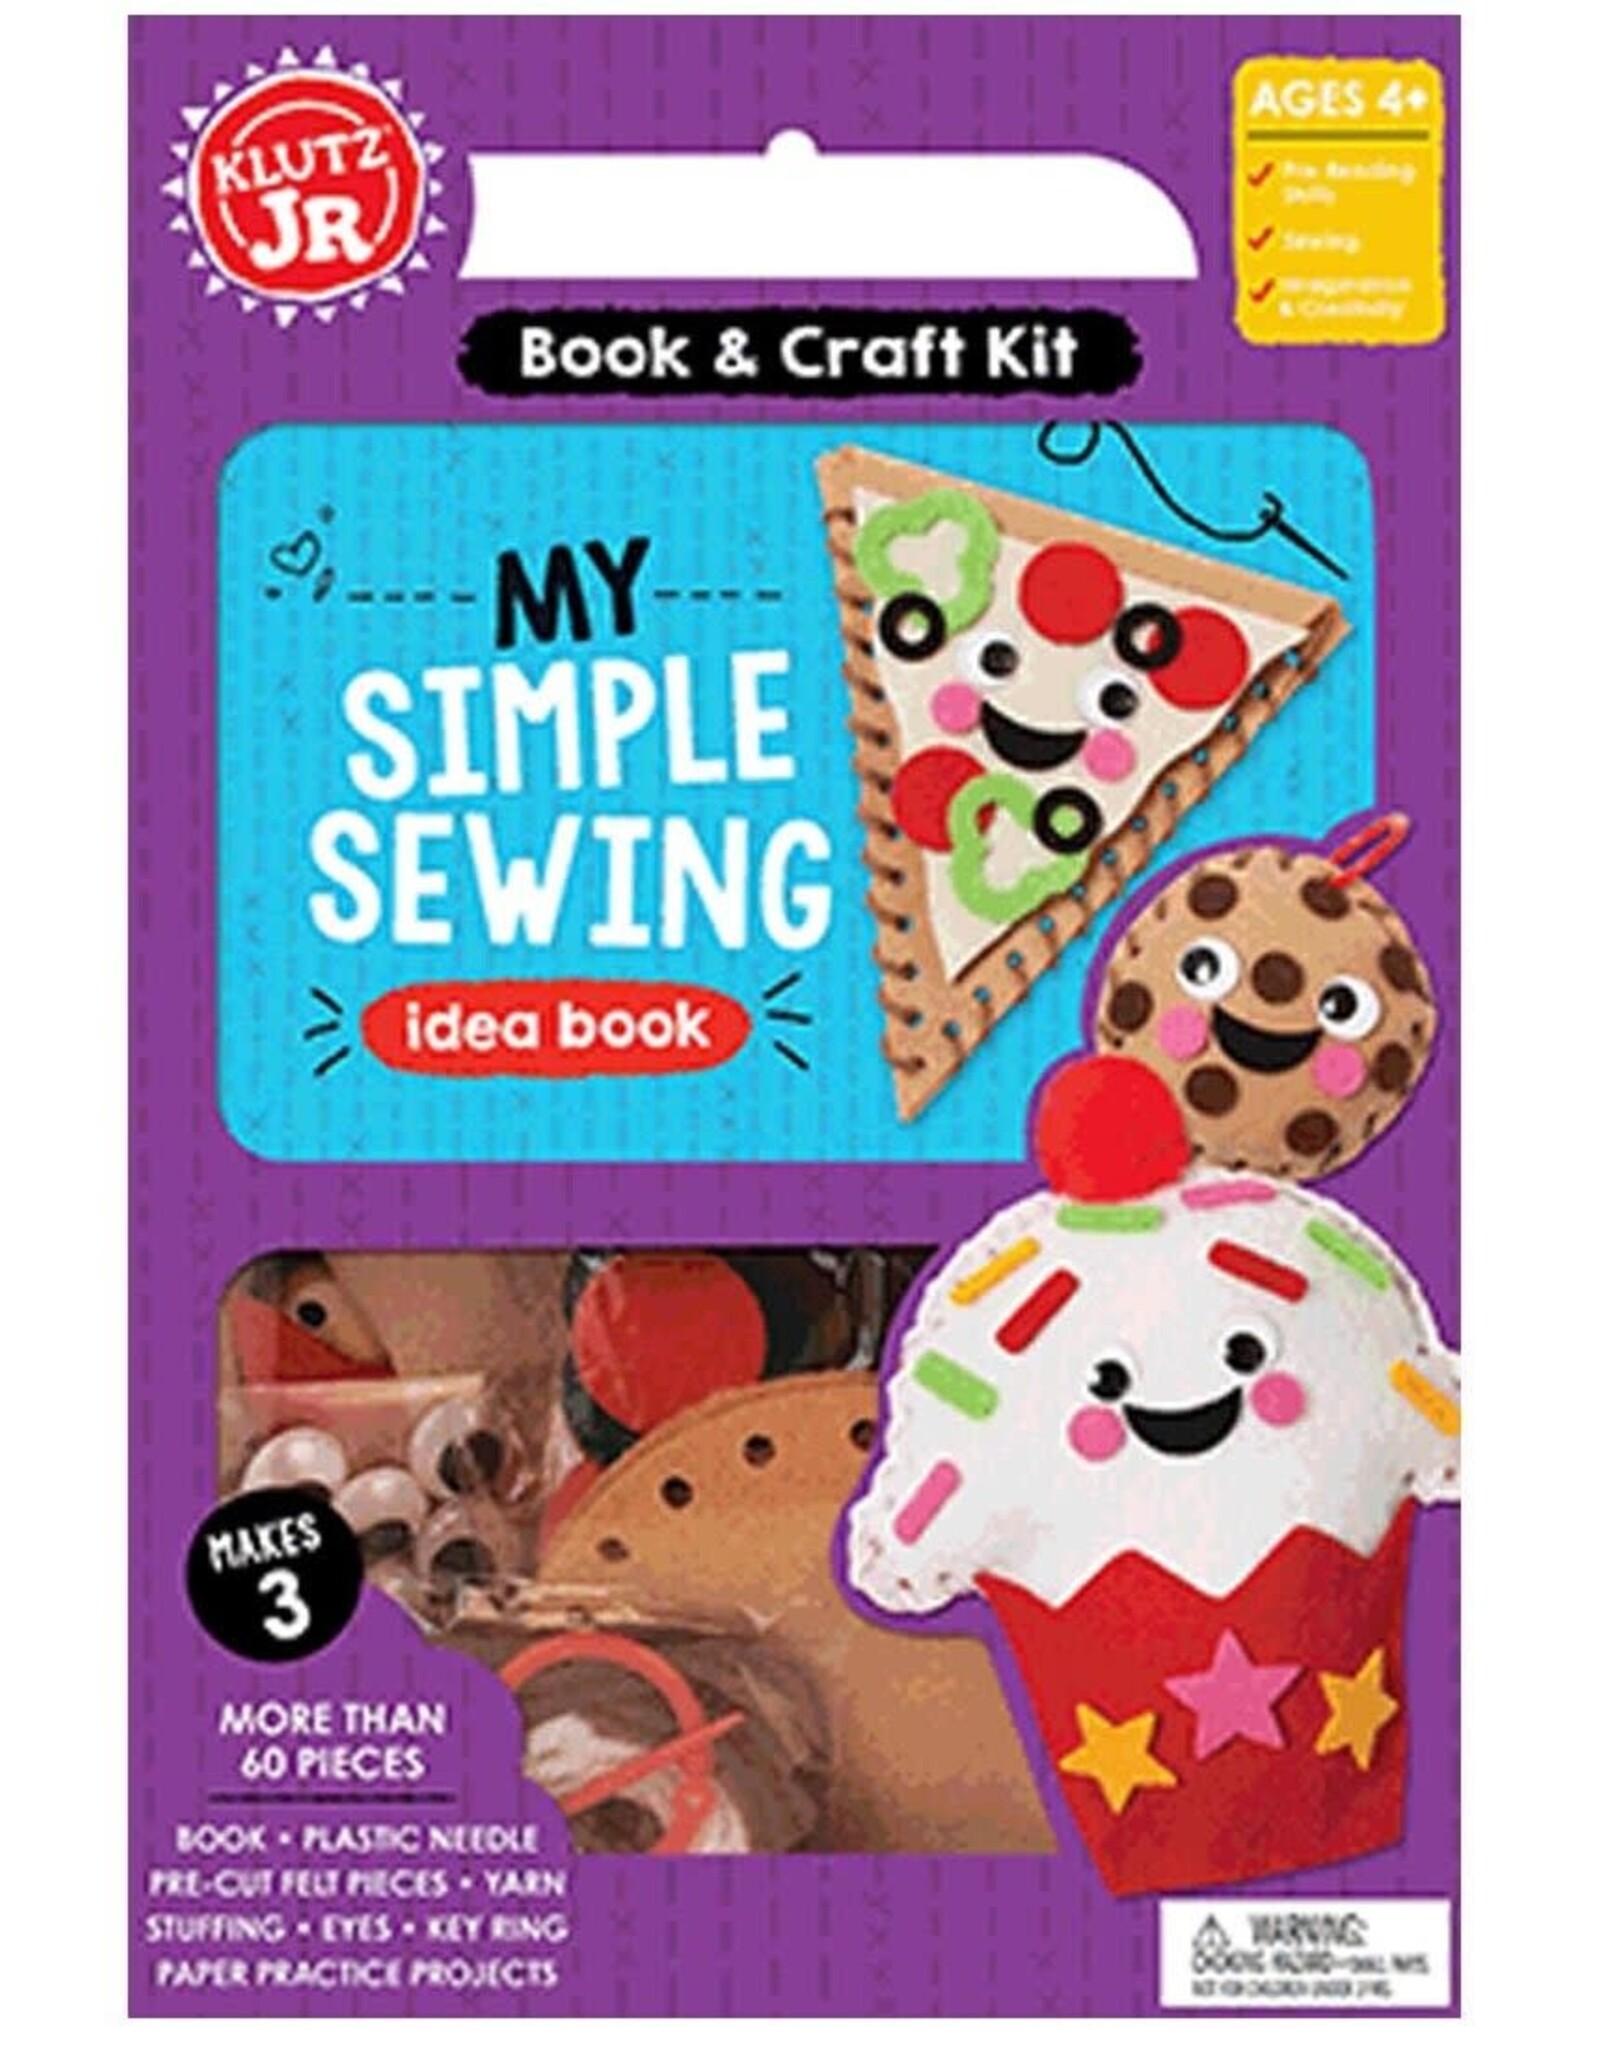 KLUTZ MY SIMPLE SEWING IDEA BOOK